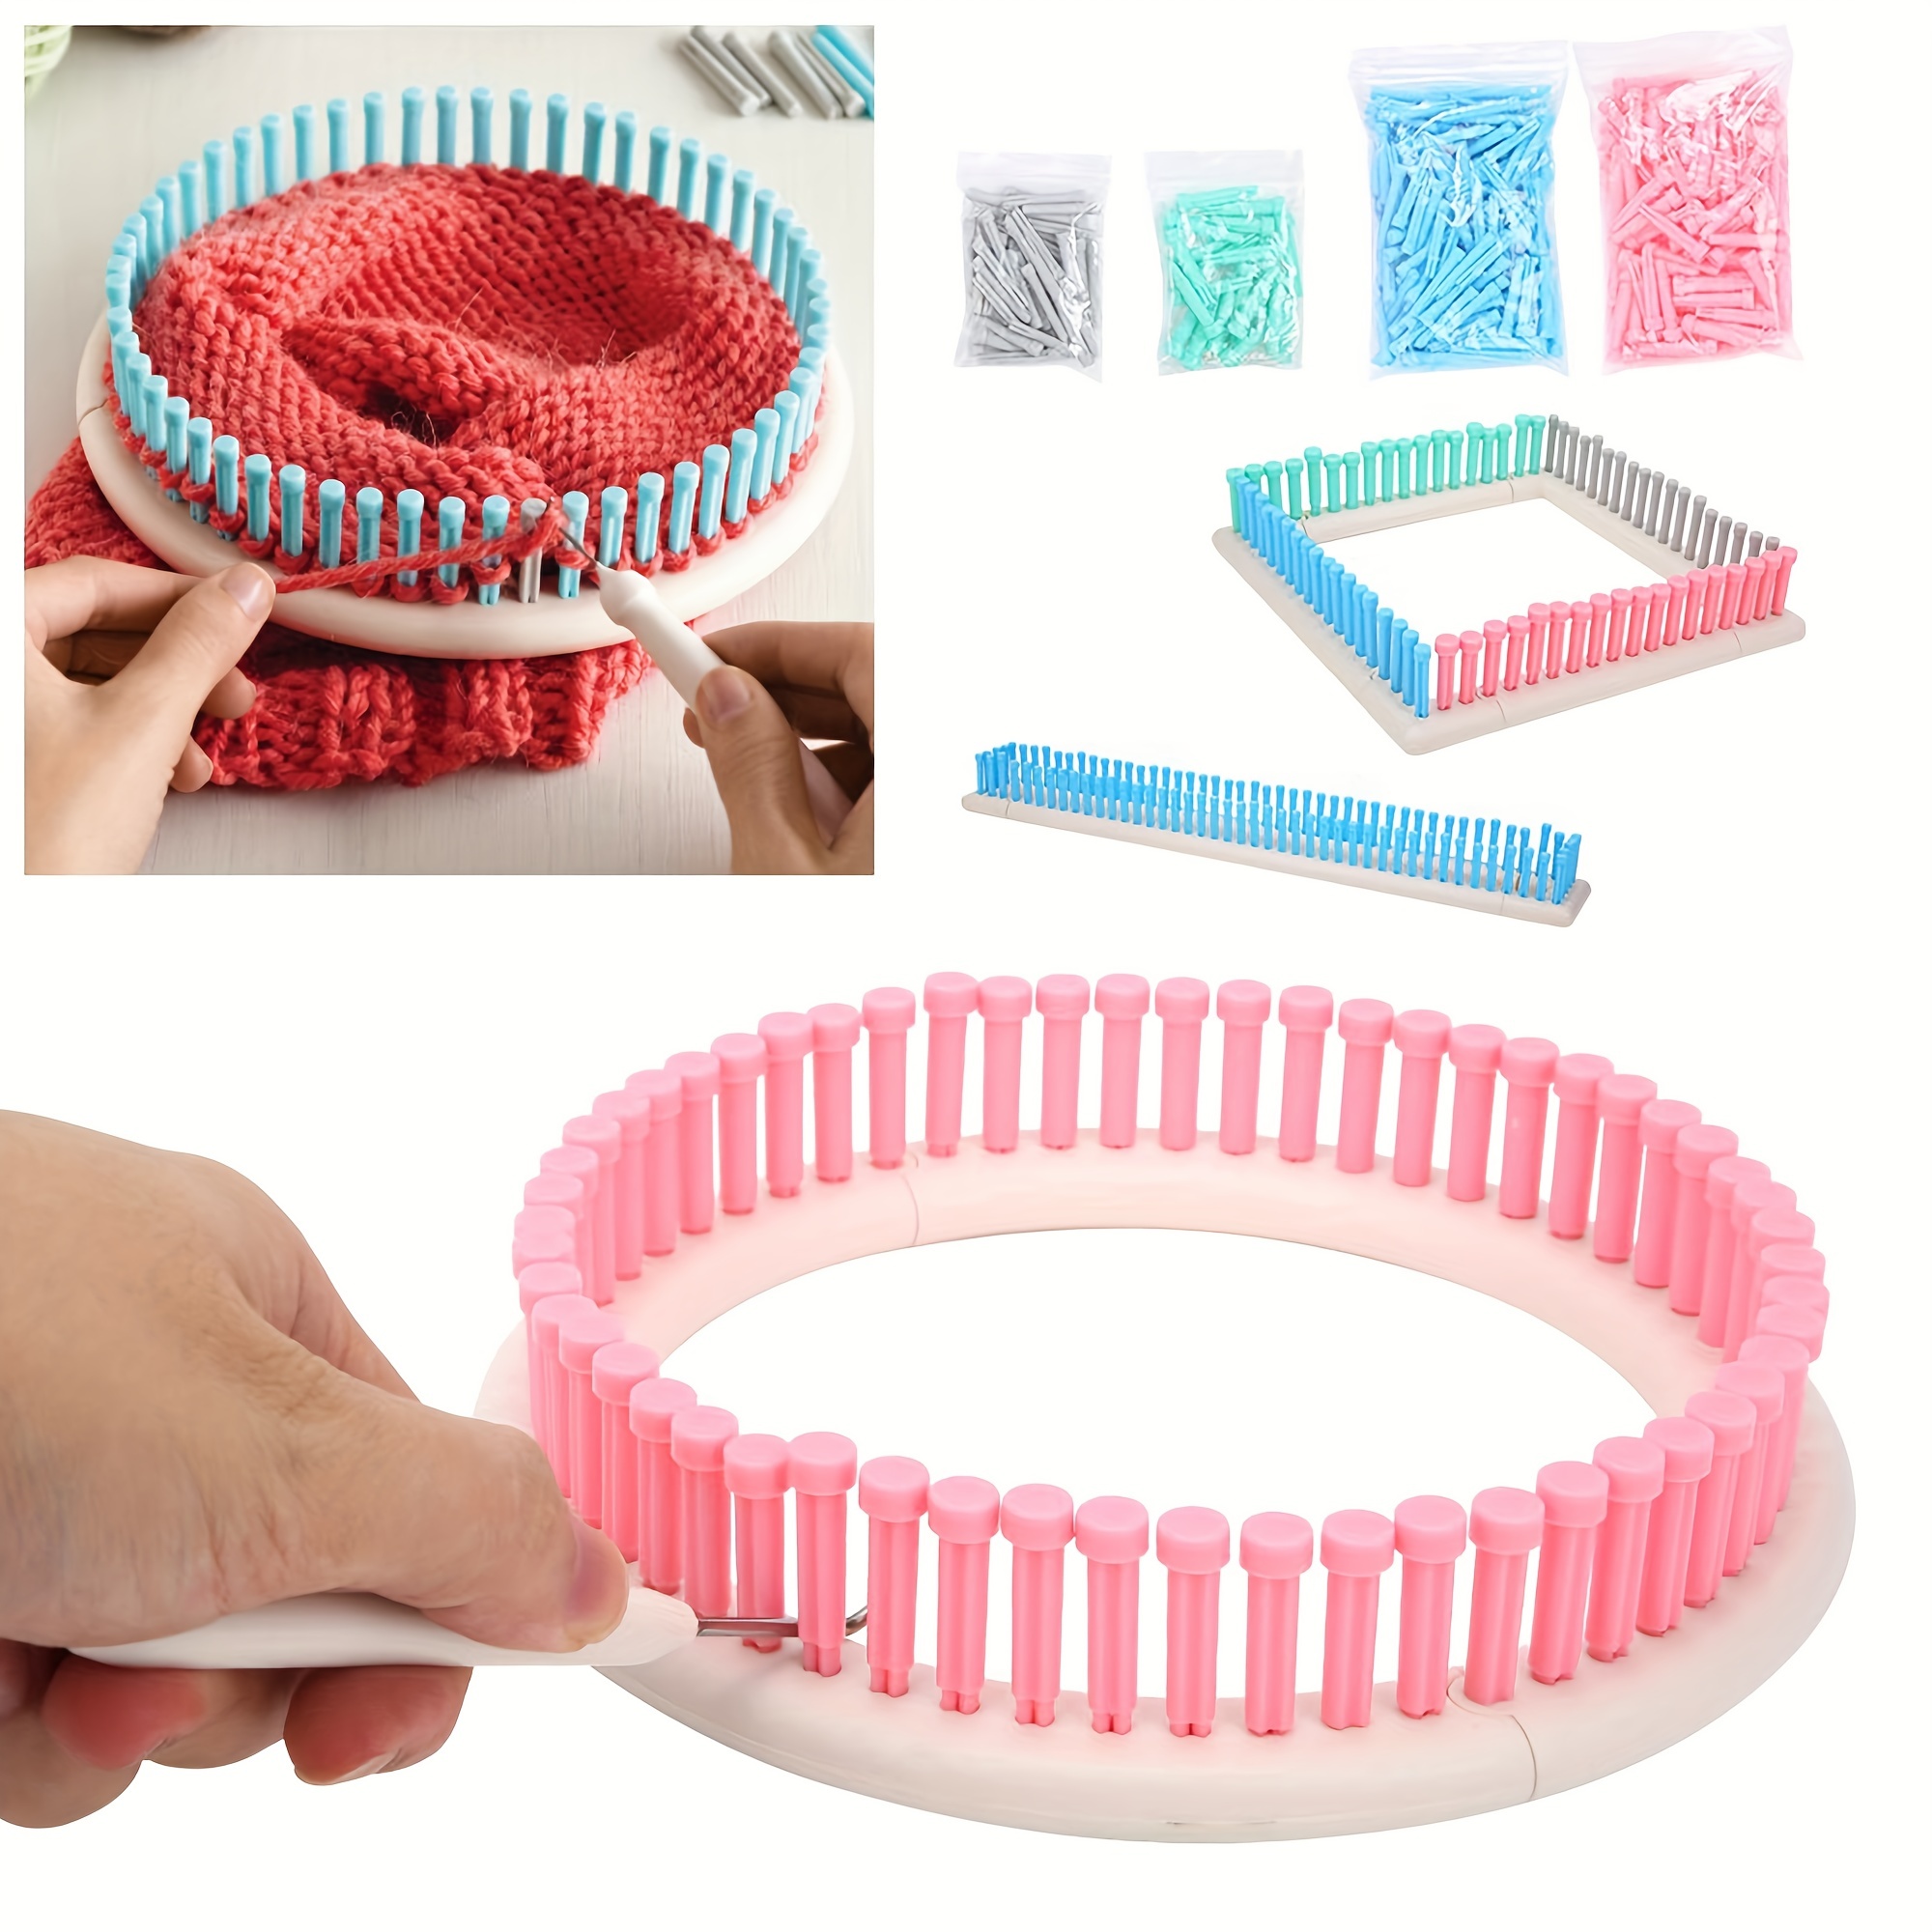 Knitting Loom Set, Round Knitting Looms with Adjustable Pegs for